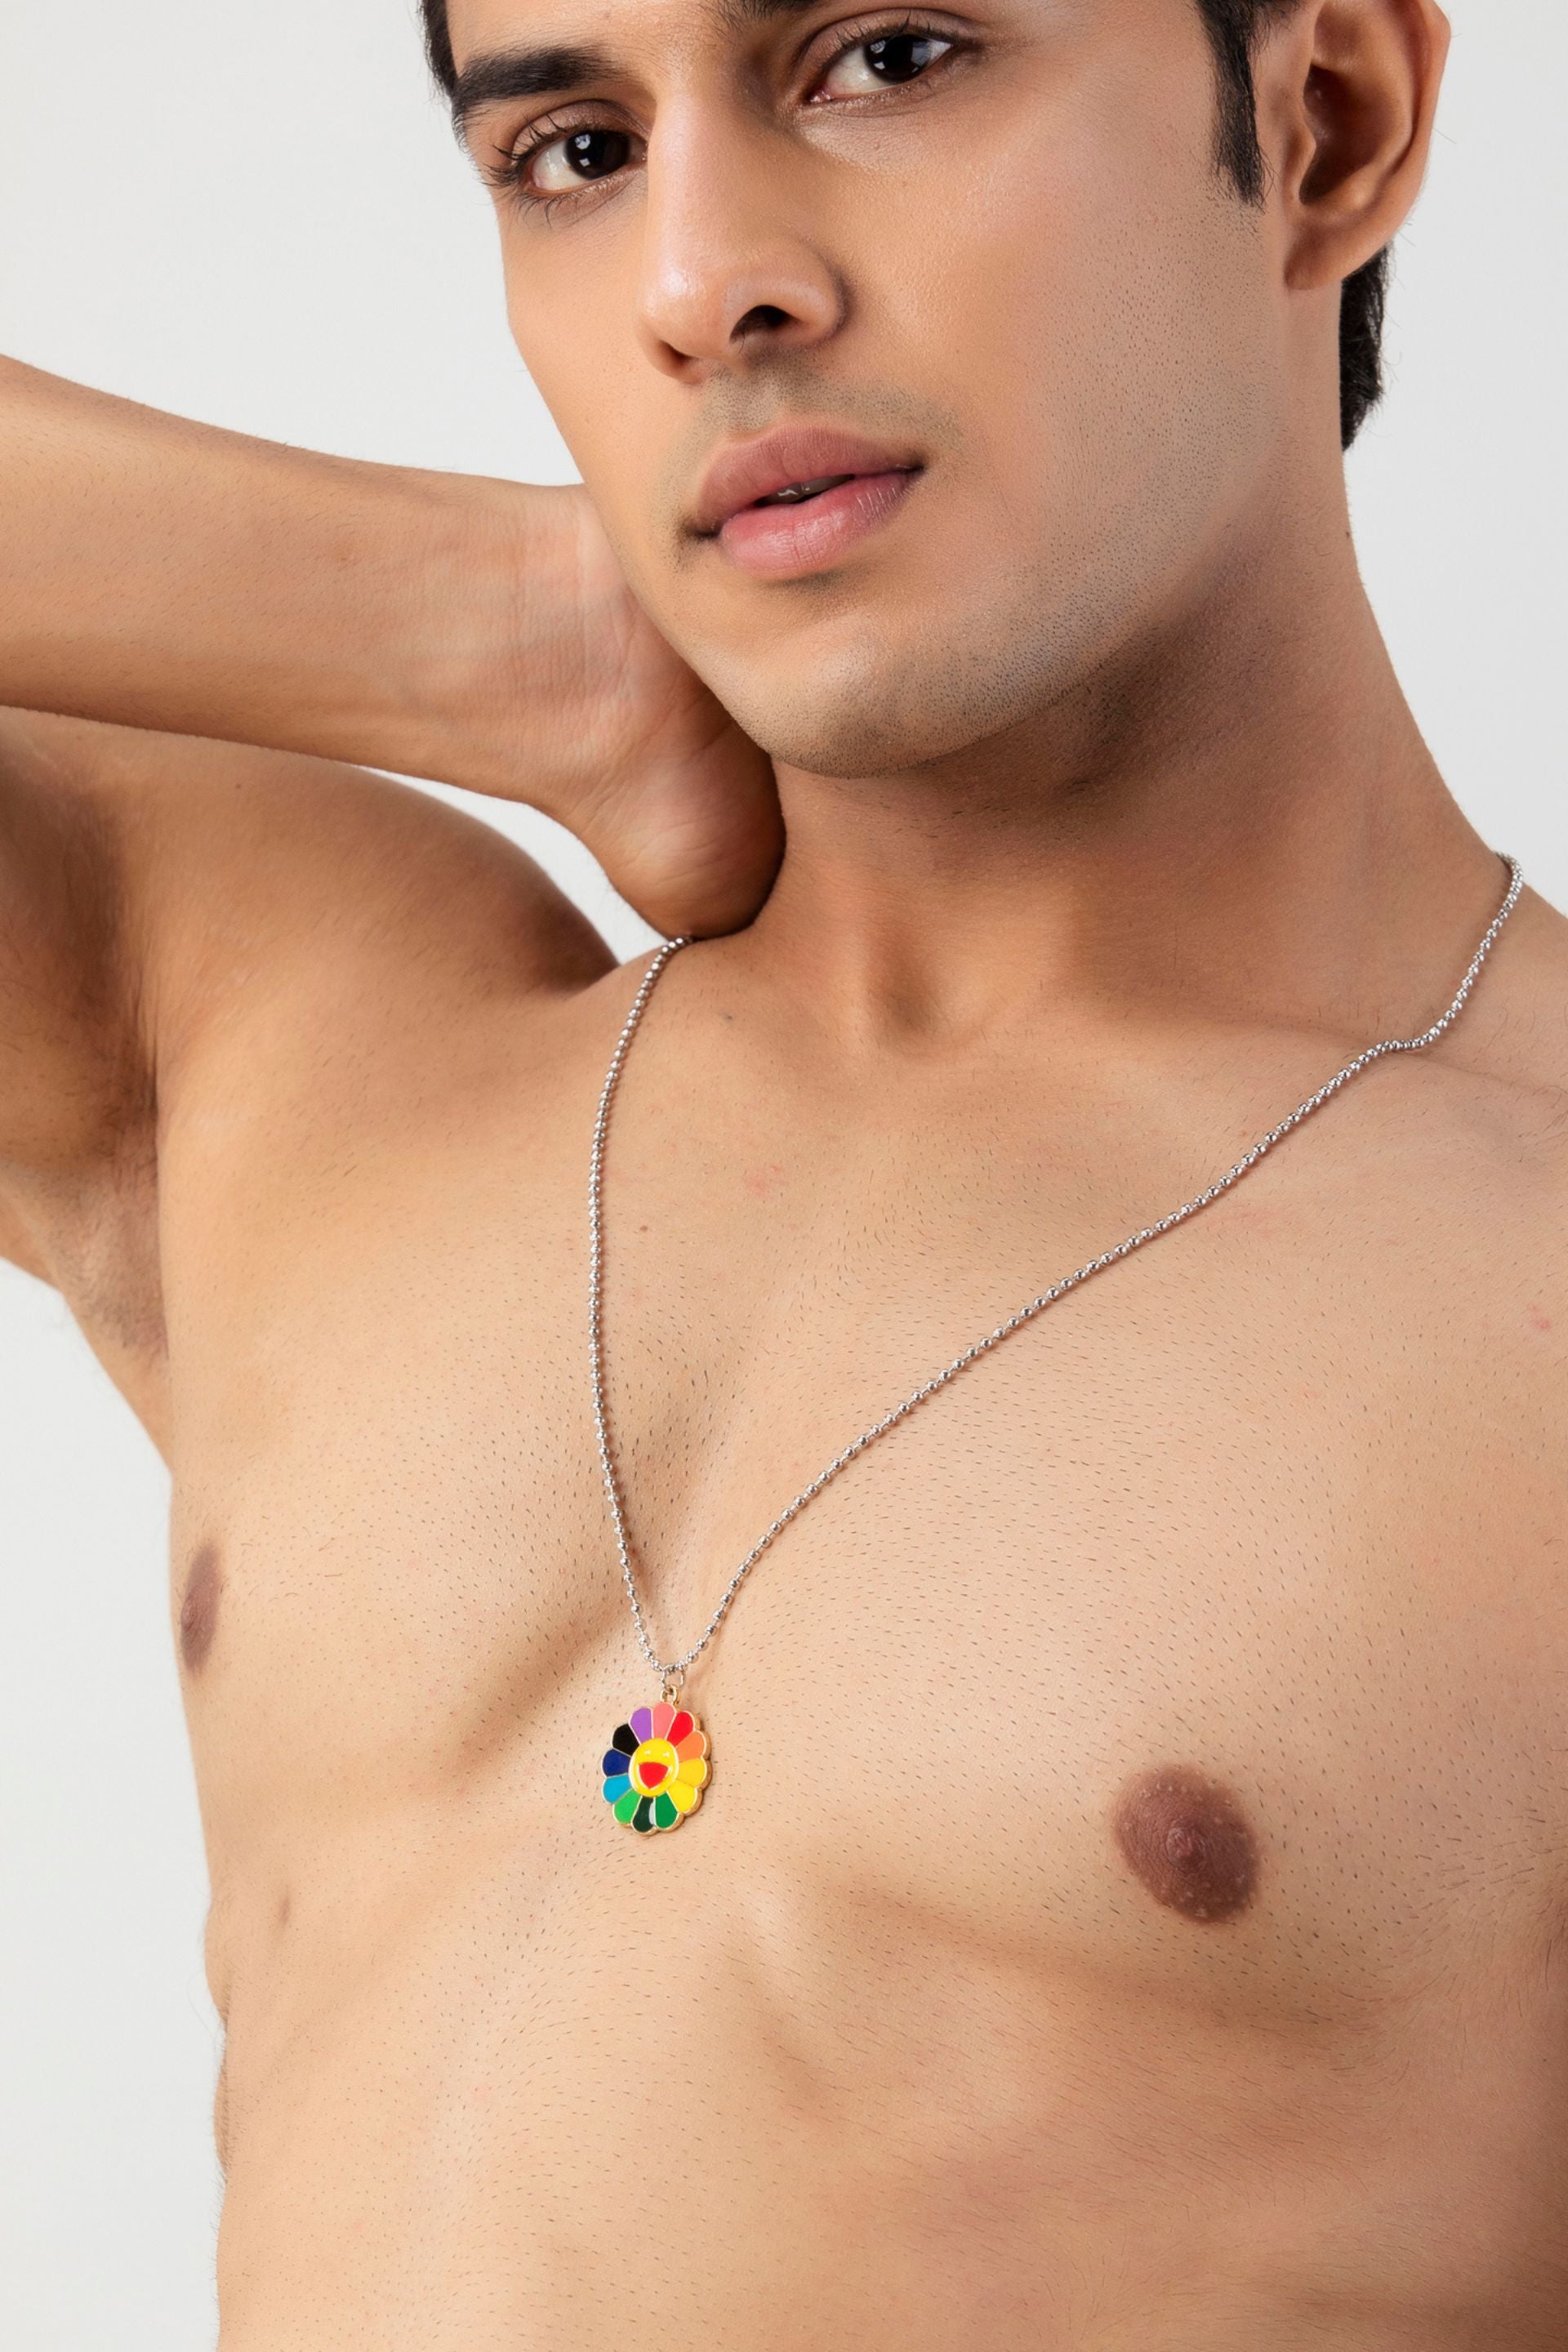 Firangi Yarn Rainbow Pride Flower Pendant with Link Chain Necklace For Him